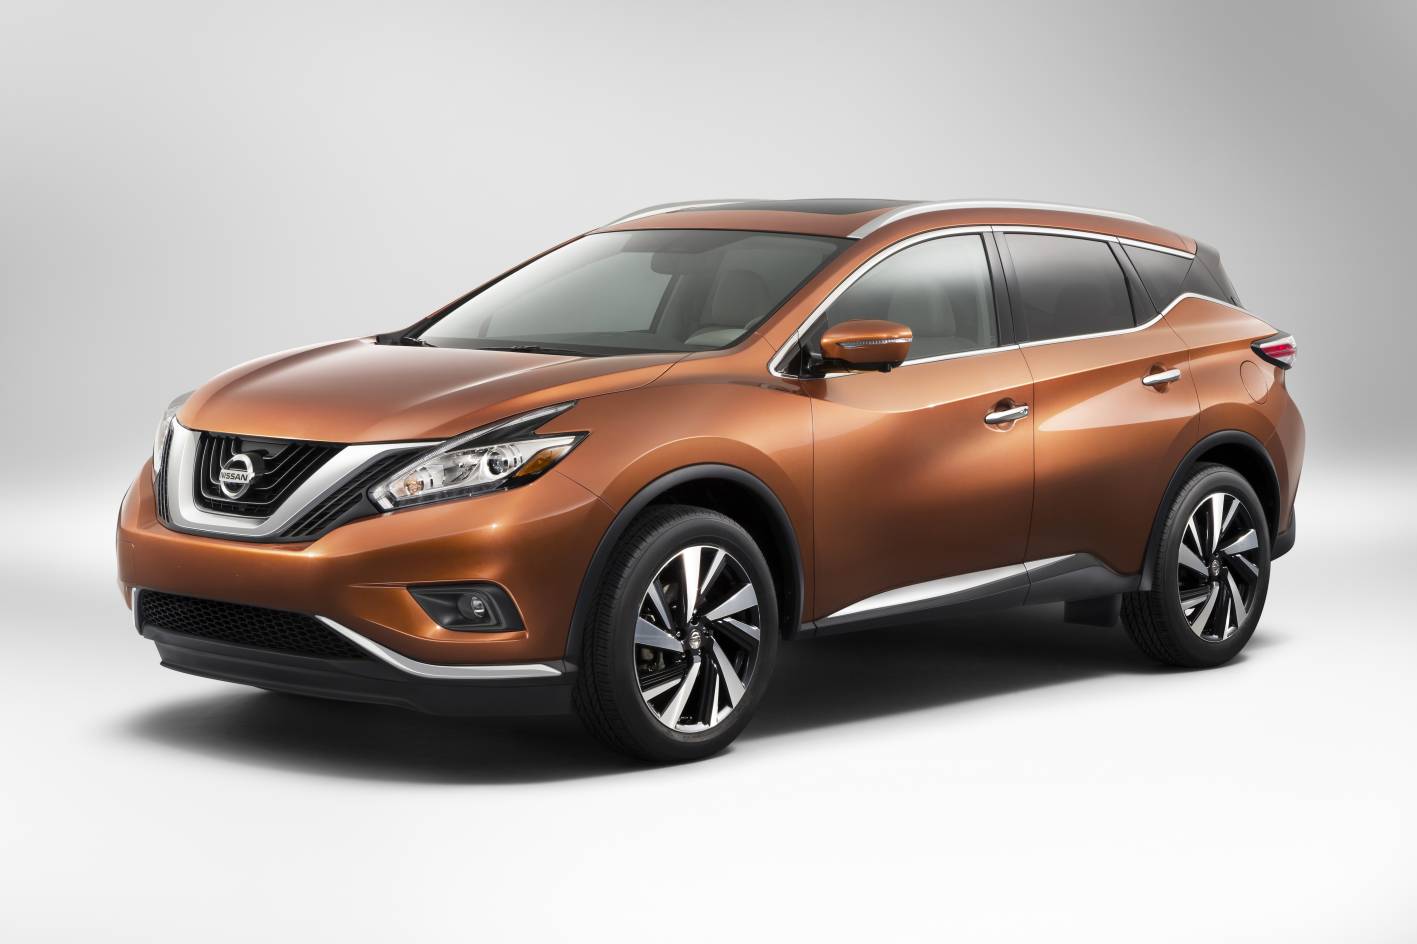 2015 Nissan Murano revealed, arrives later next year